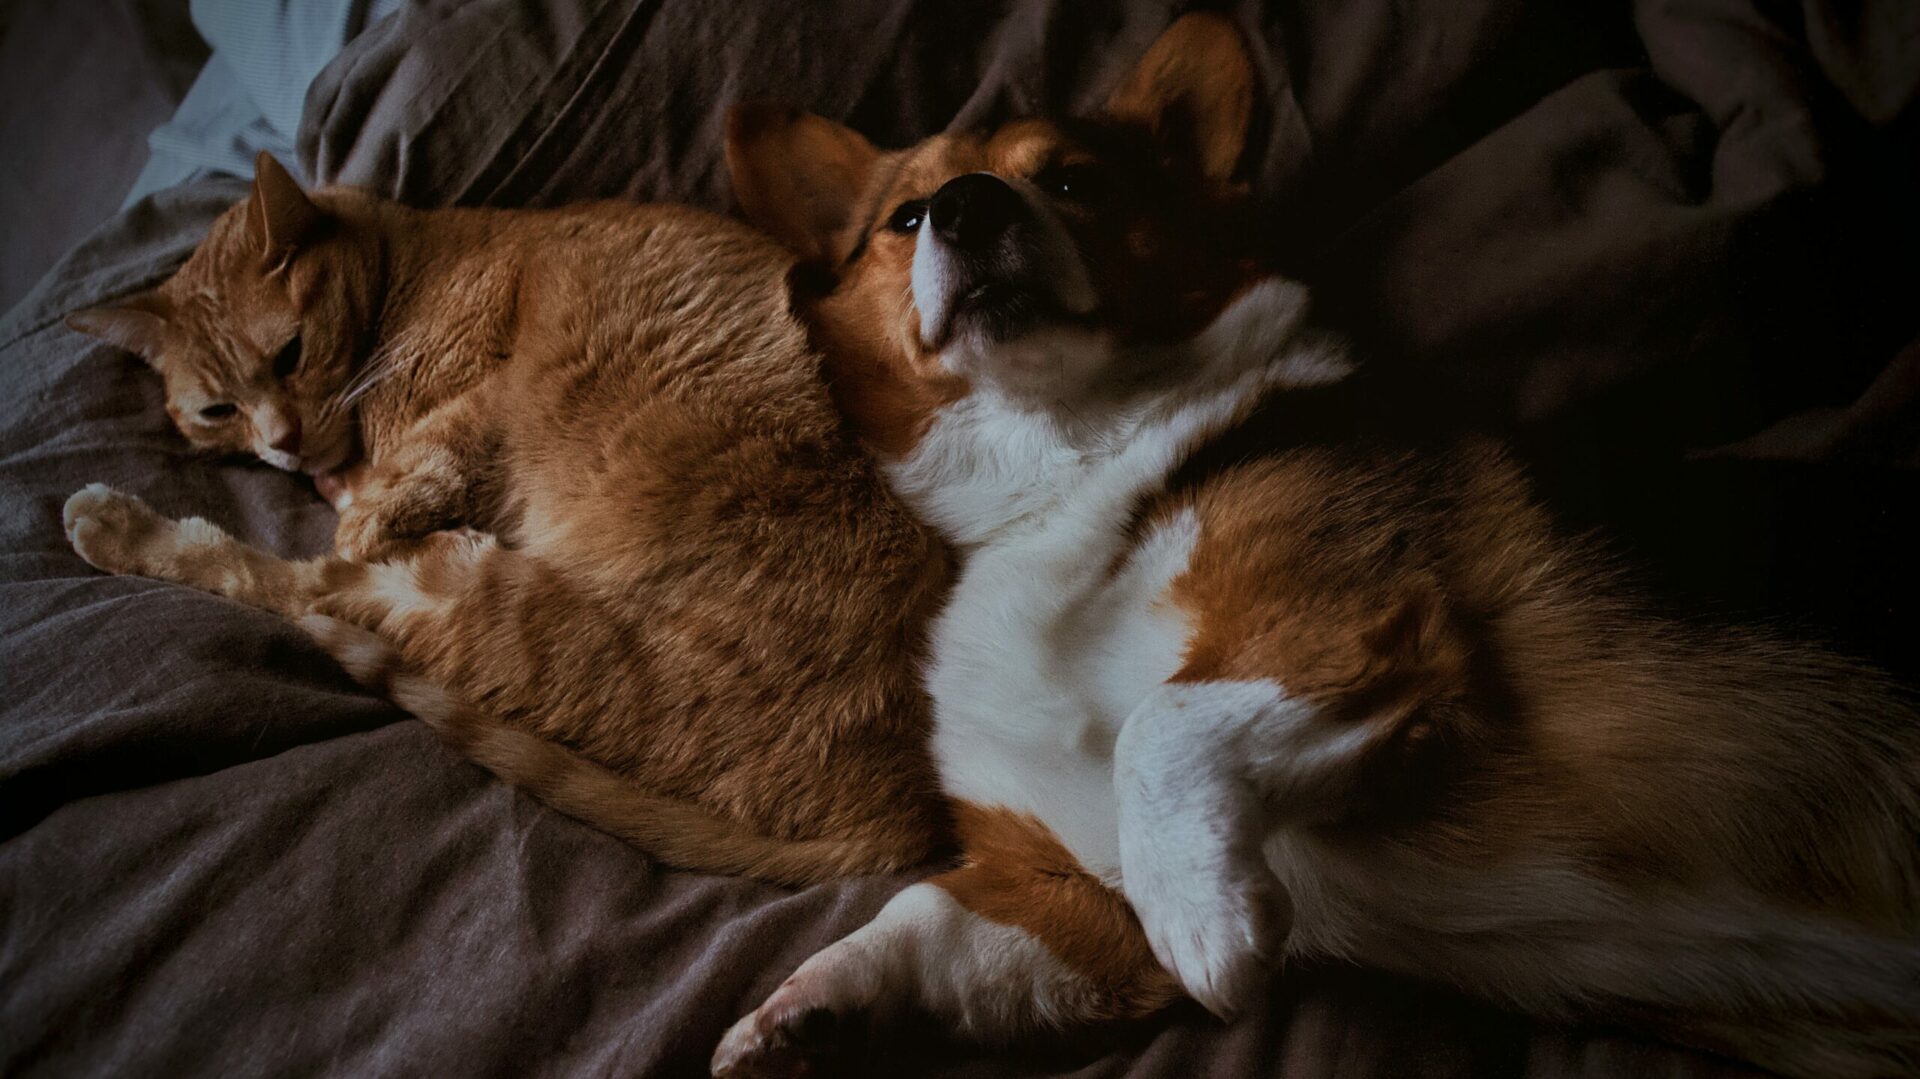 A cat and a dog cuddling together.